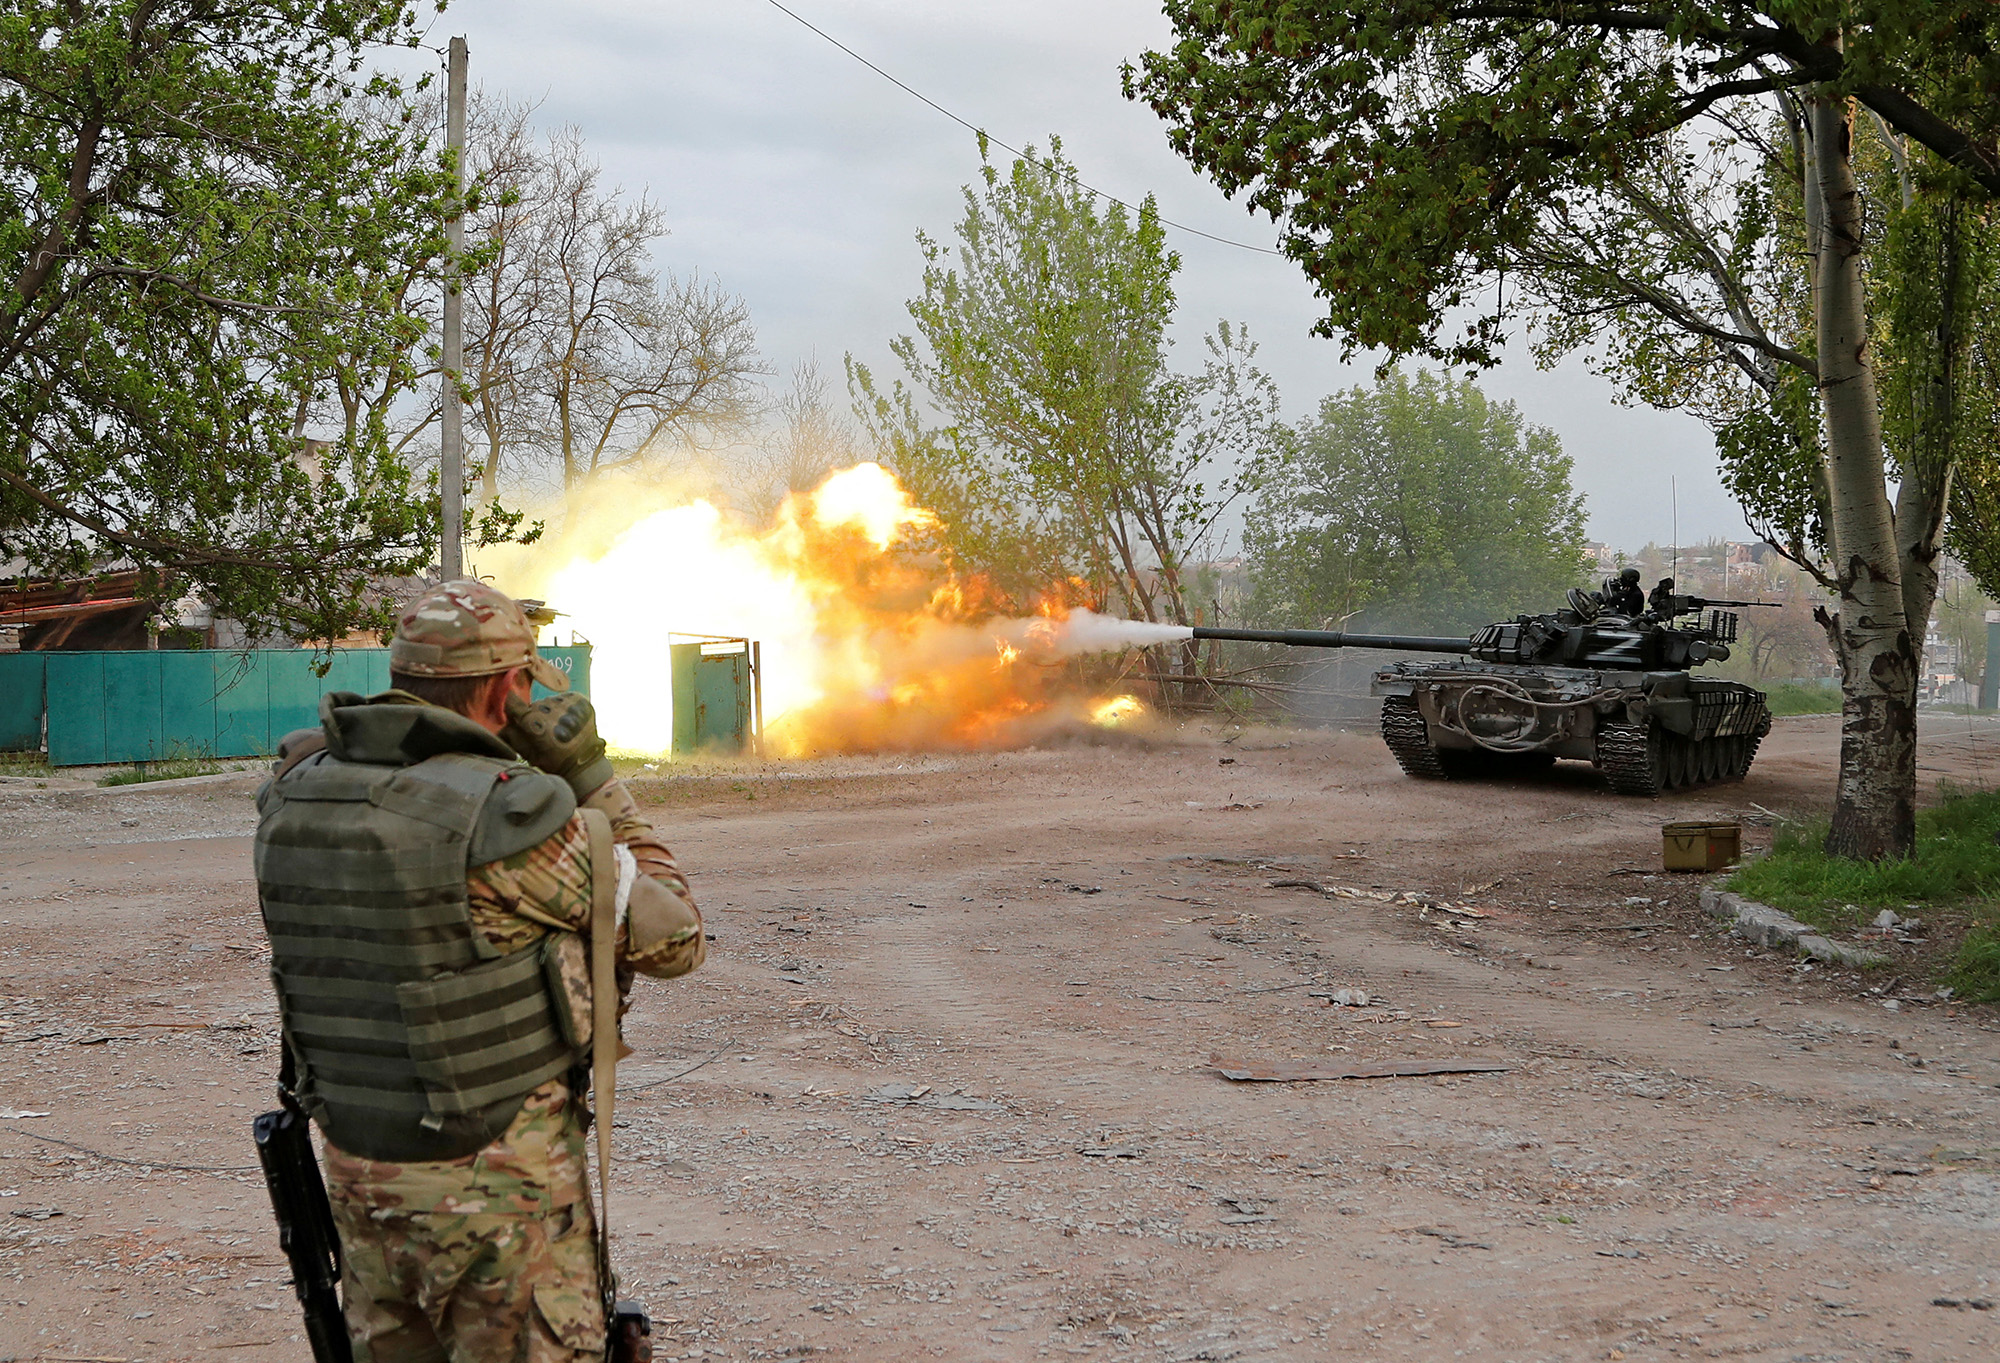 Service members of pro-Russian troops fire from a tank during fighting near the Azovstal steel plant in the southern port city of Mariupol, Ukraine, on May 5.